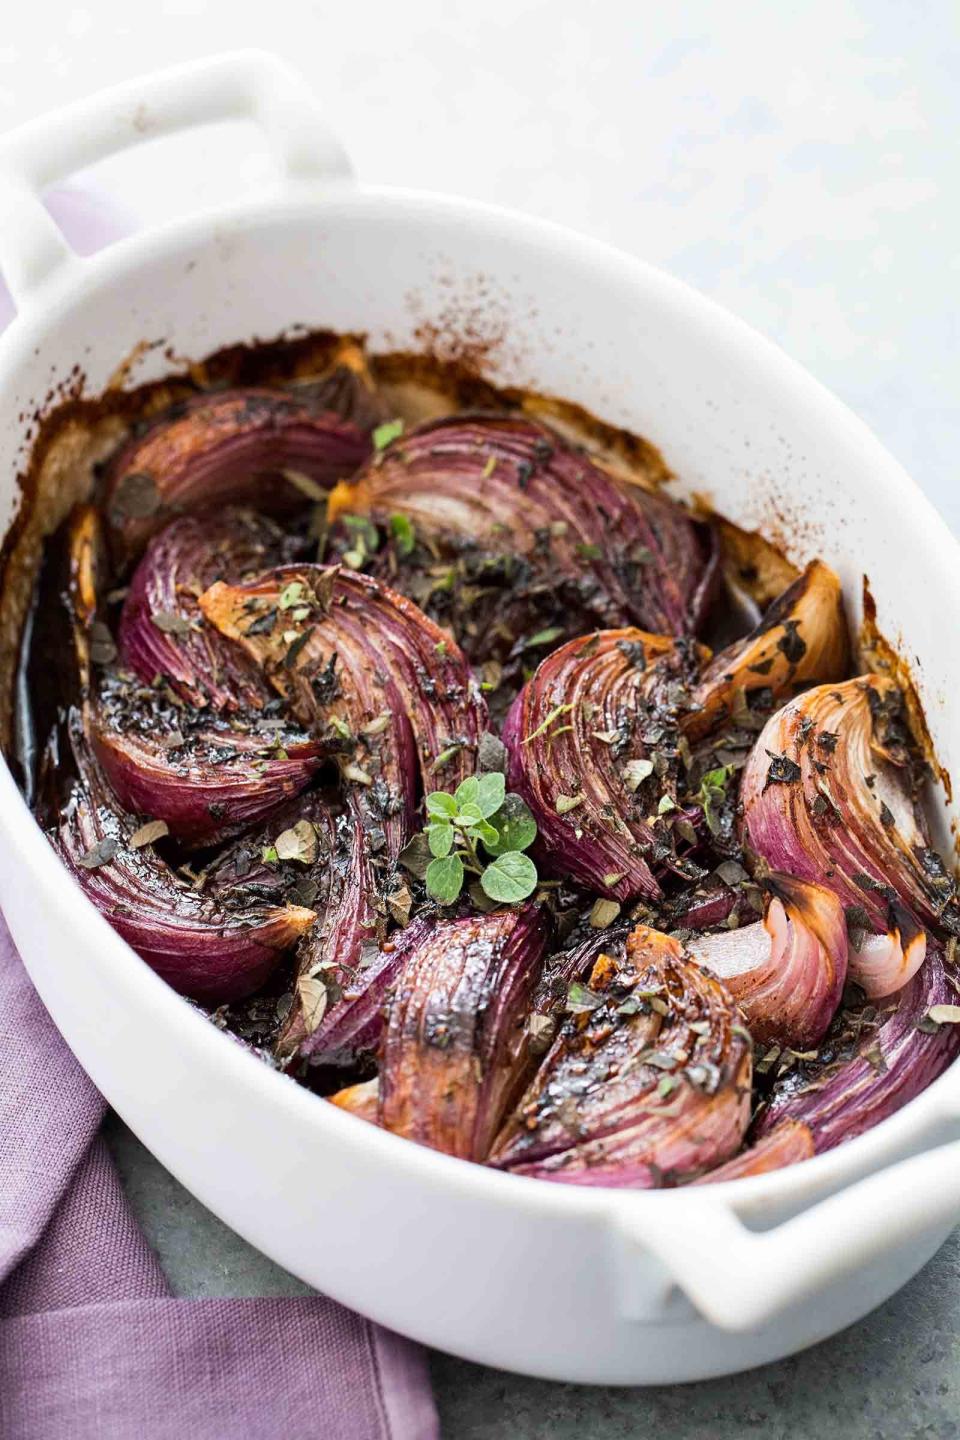 <strong>Get the <a href="http://www.simplyrecipes.com/recipes/balsamic_glazed_red_onions/" target="_blank">Balsamic Grazed Red Onions recipe</a> from Simply Recipes</strong>